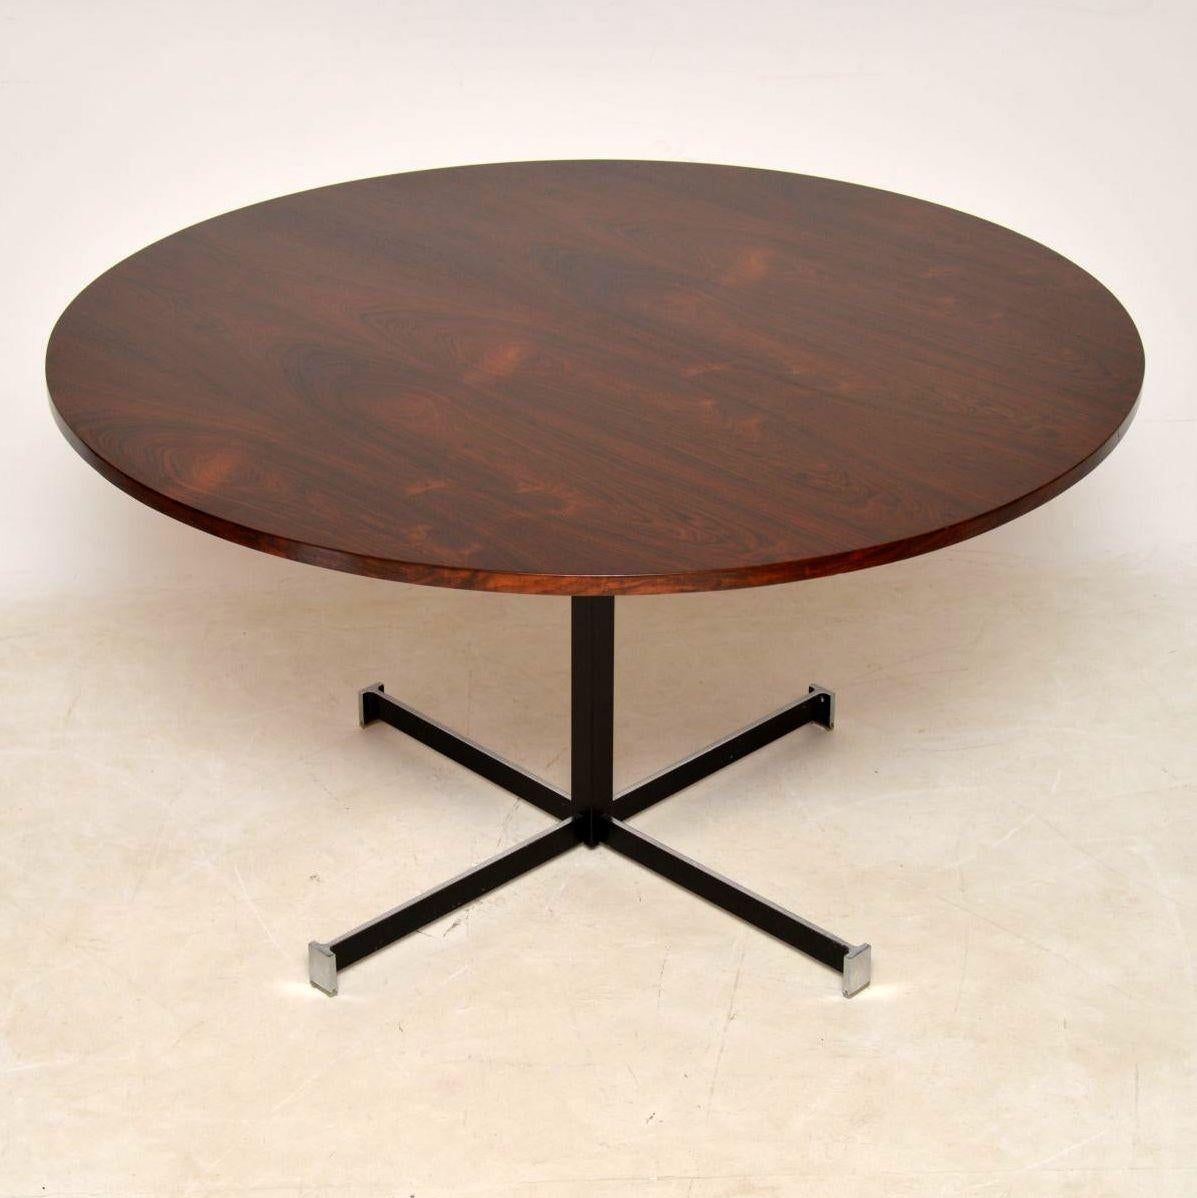 A beautiful vintage dining table with a large circular top, and chromed steel base. This is a great size and can seat up to six, as the base is a central column, there are no obstructions for chairs. The top has stunning grain patterns and a